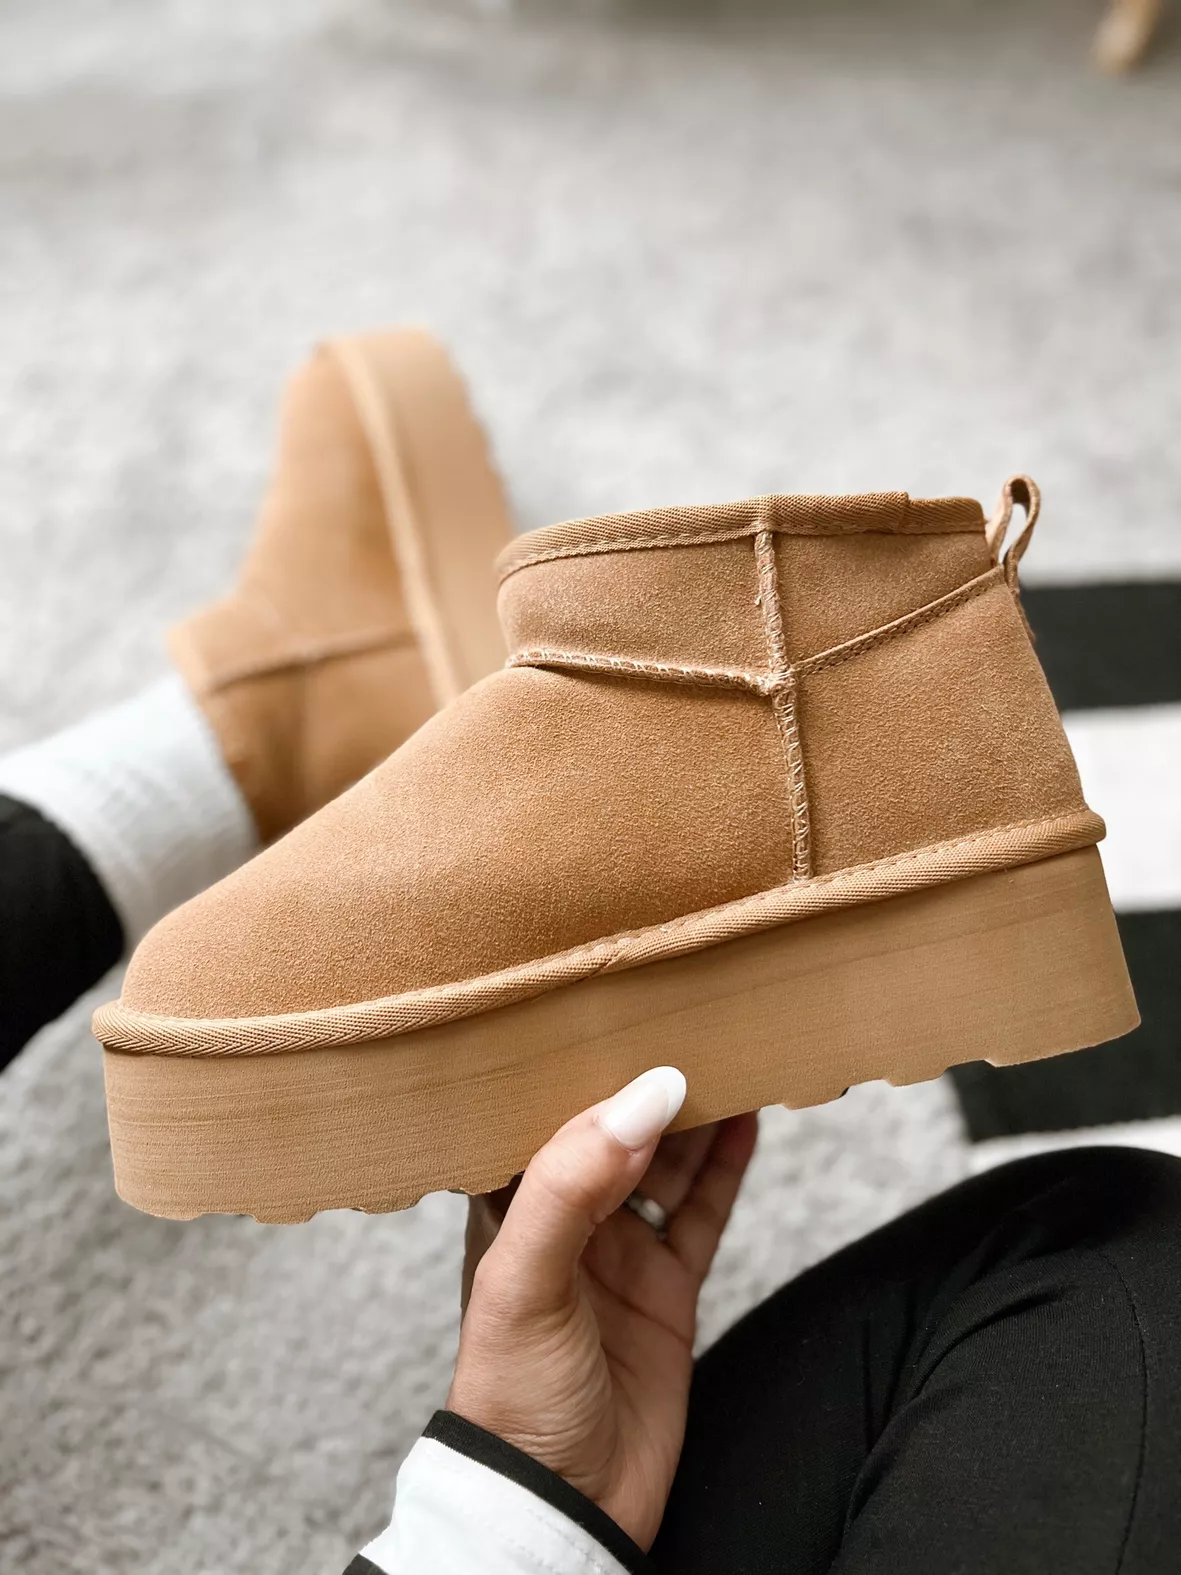 Cozy up this winter with stylish Ugg boots